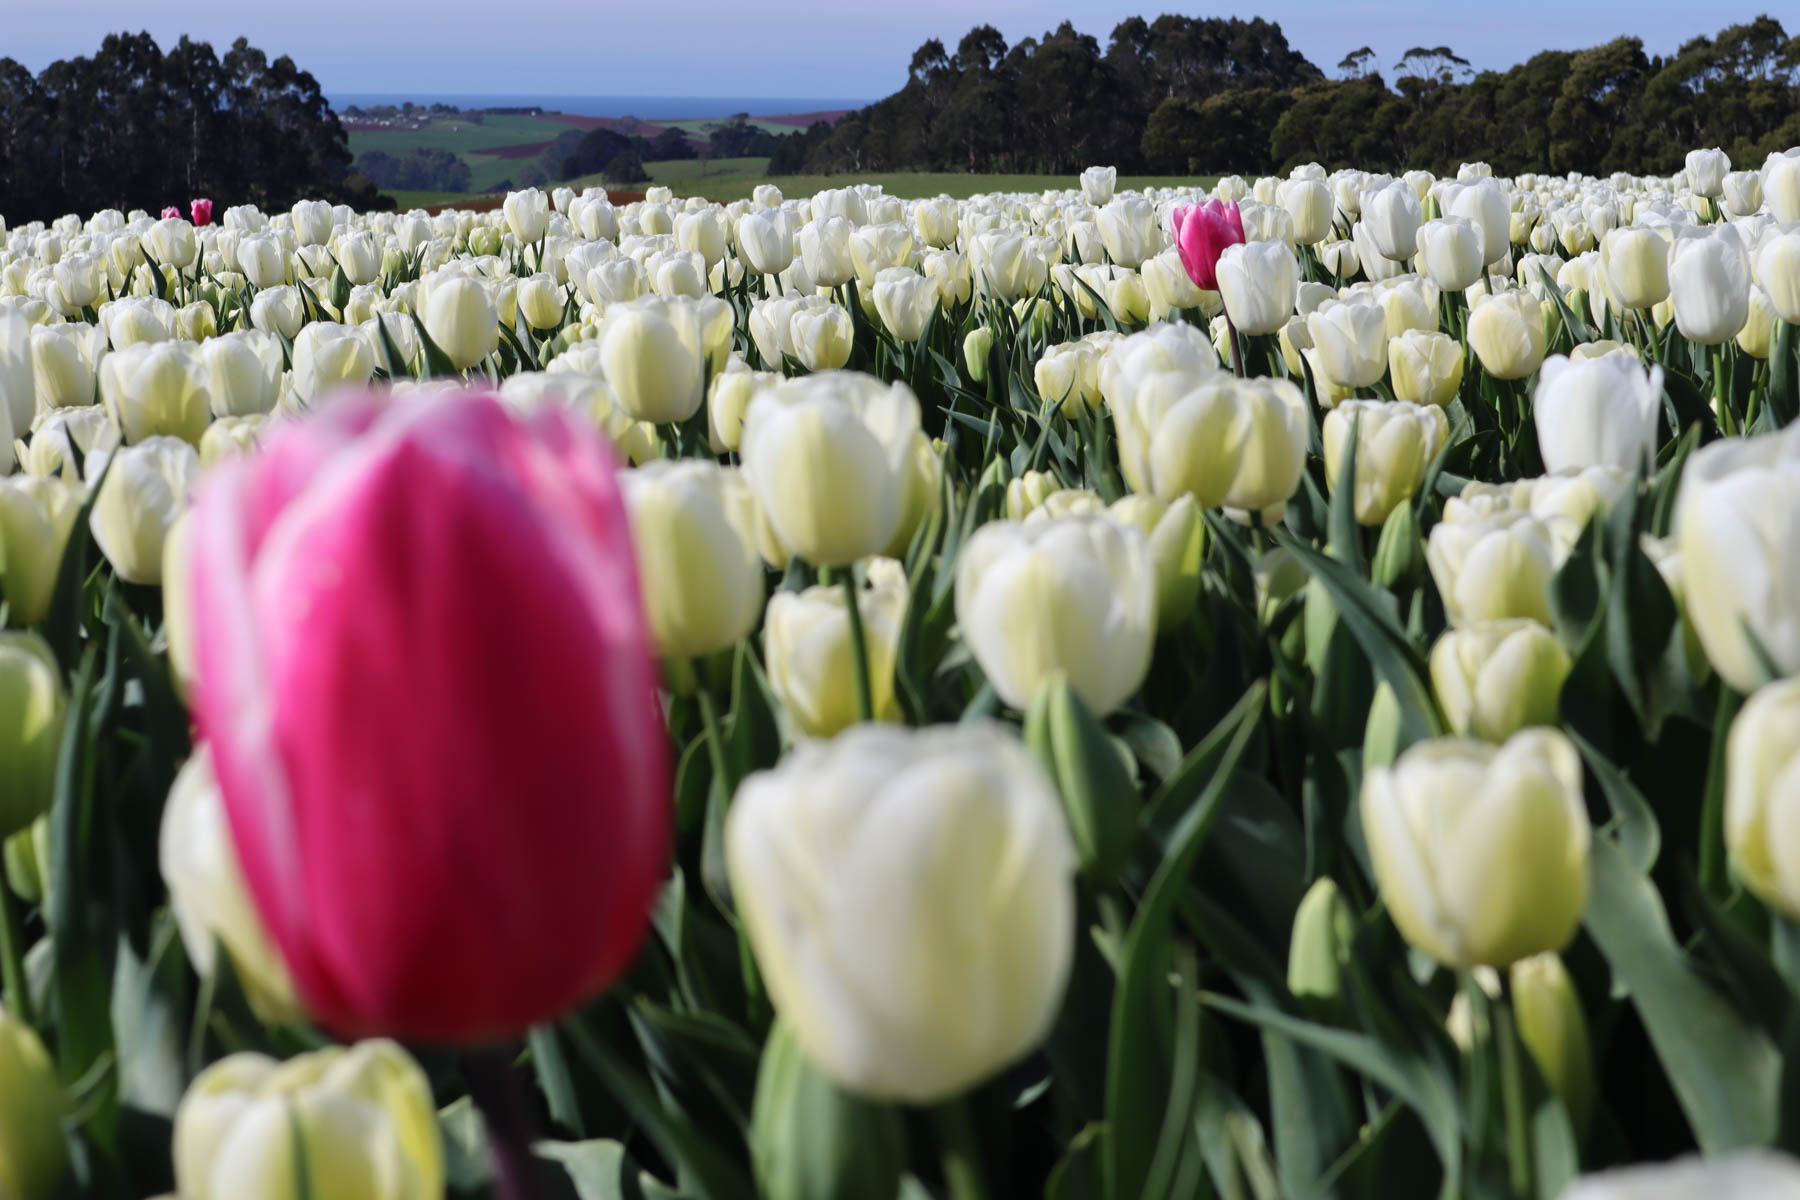 Capture yourself amidst blooming tulips on our exclusive farm tour. Limited spots available – book now! 2